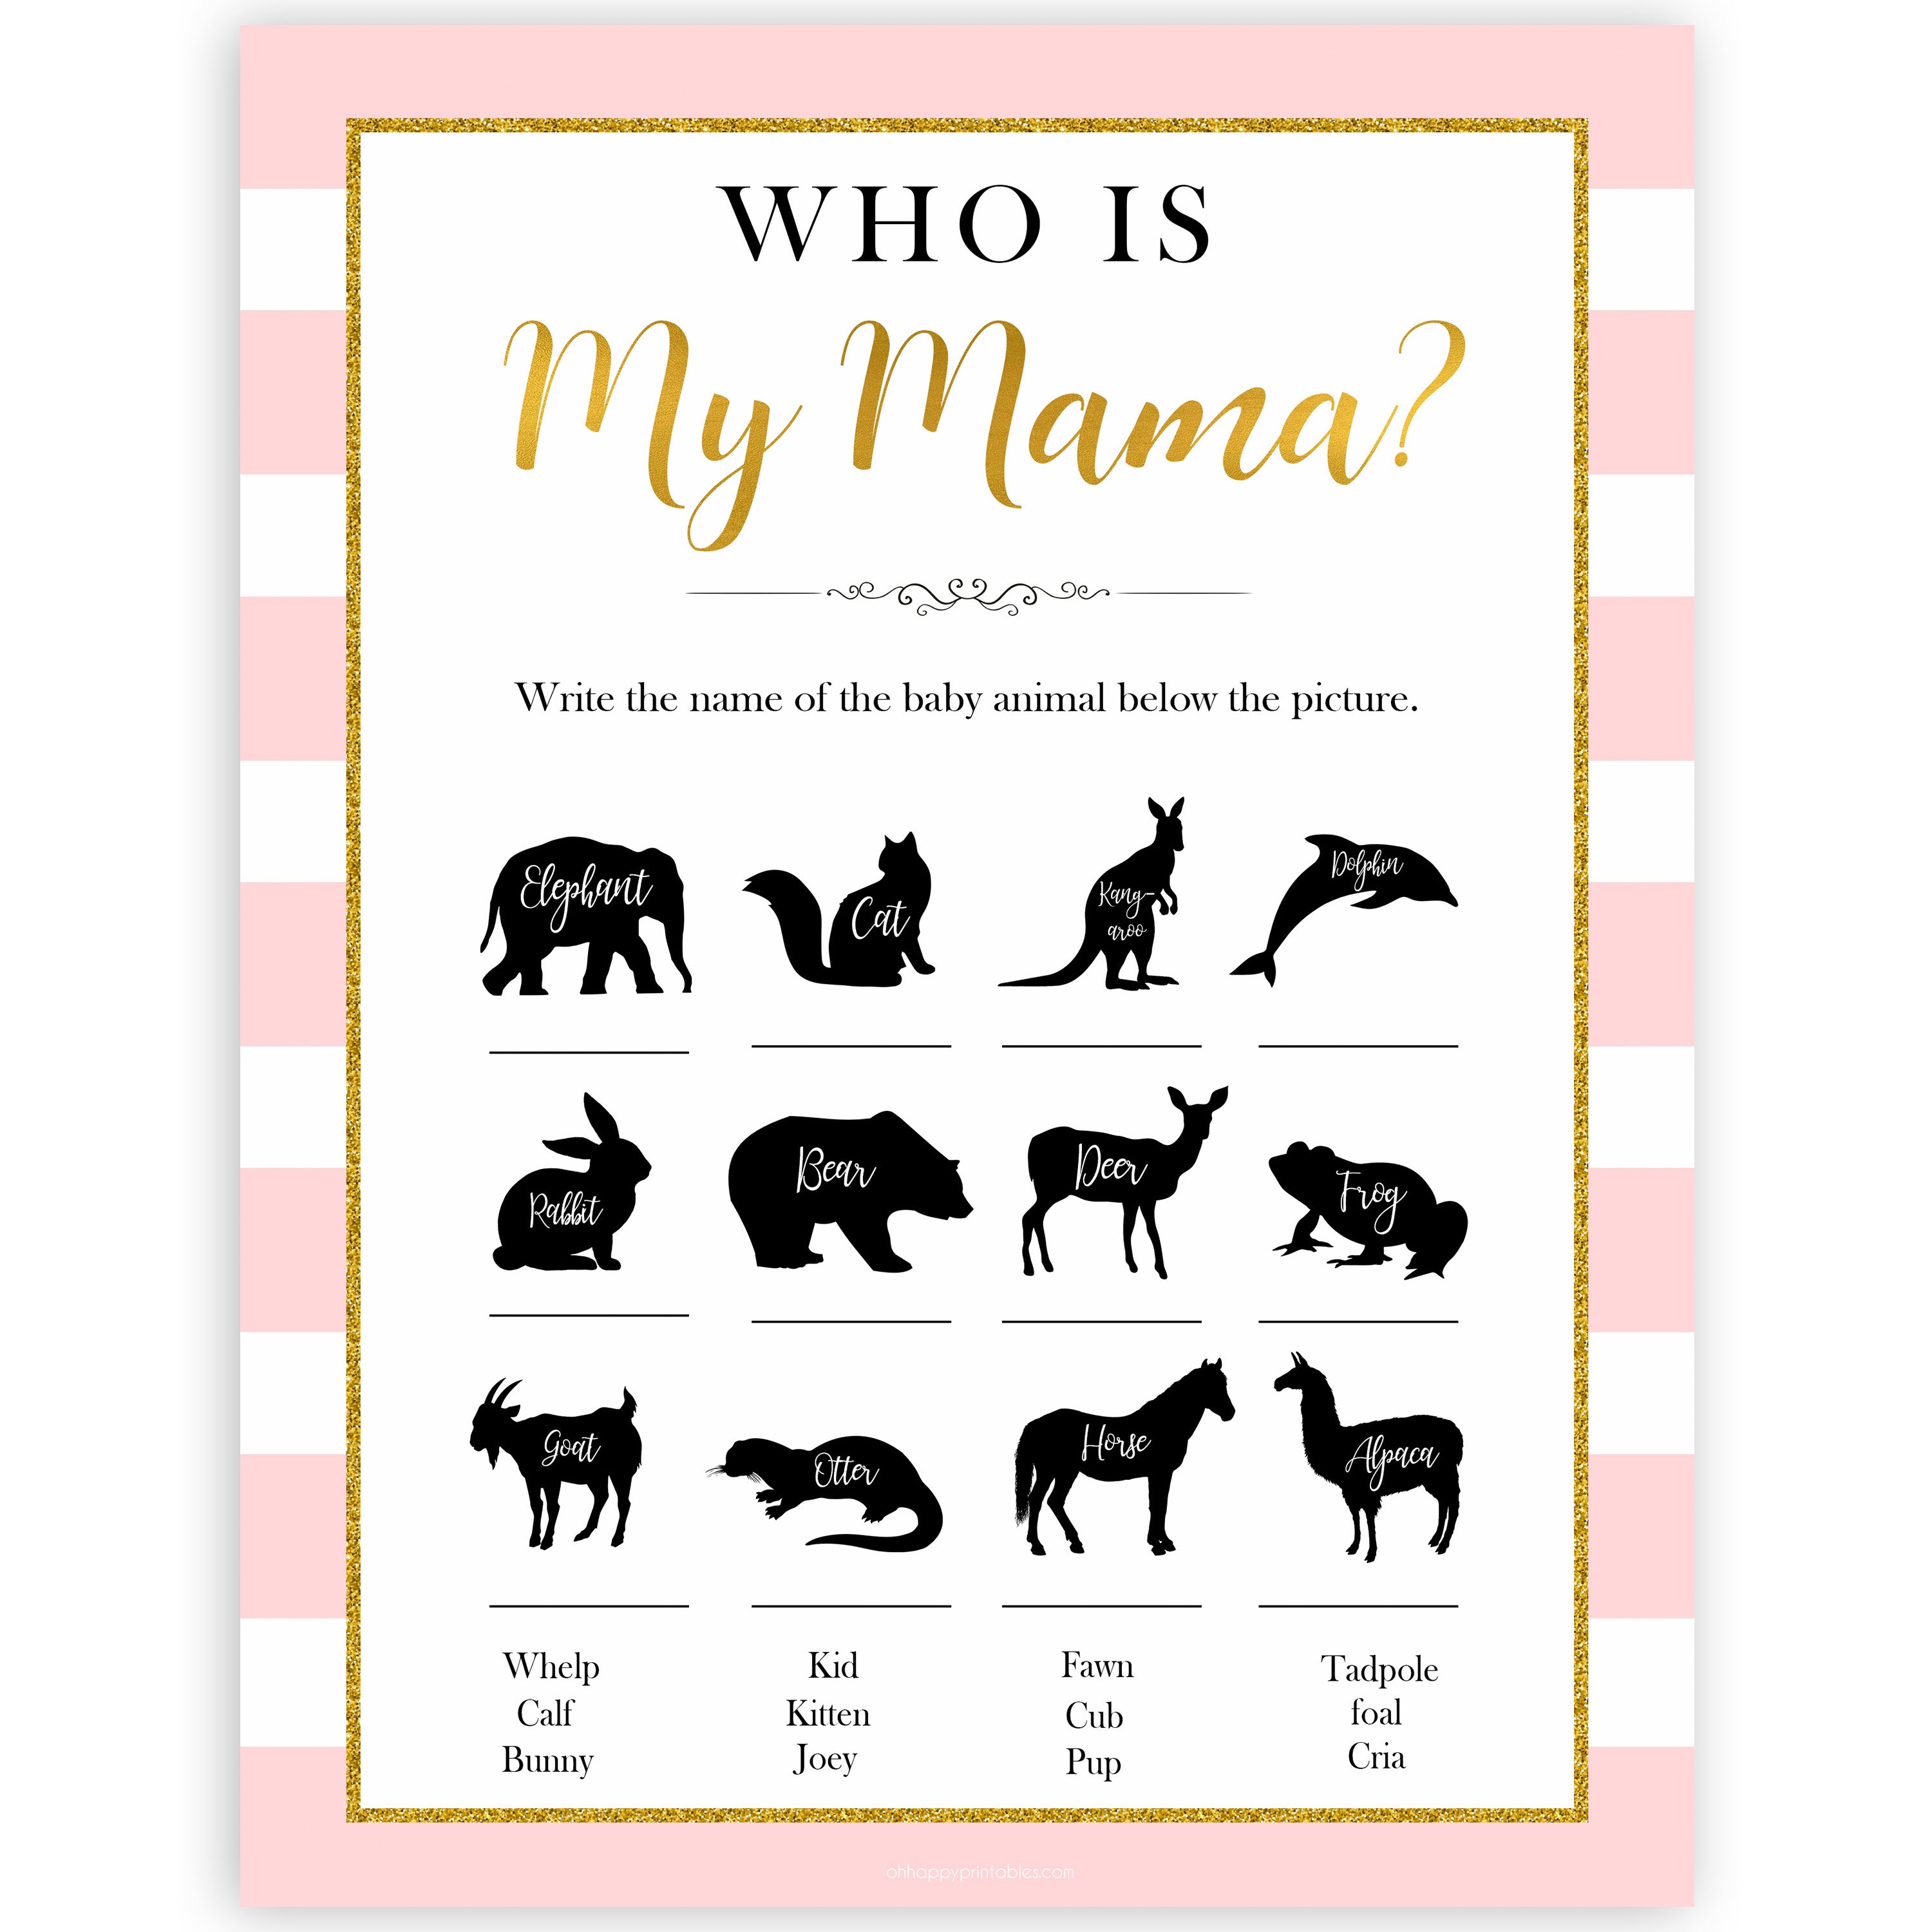 Paris themed baby shower, who is my mama baby game, Parisian baby shower, printable baby shower games, fun baby games, popular baby games, baby shower ideas, fun baby games, Paris baby games